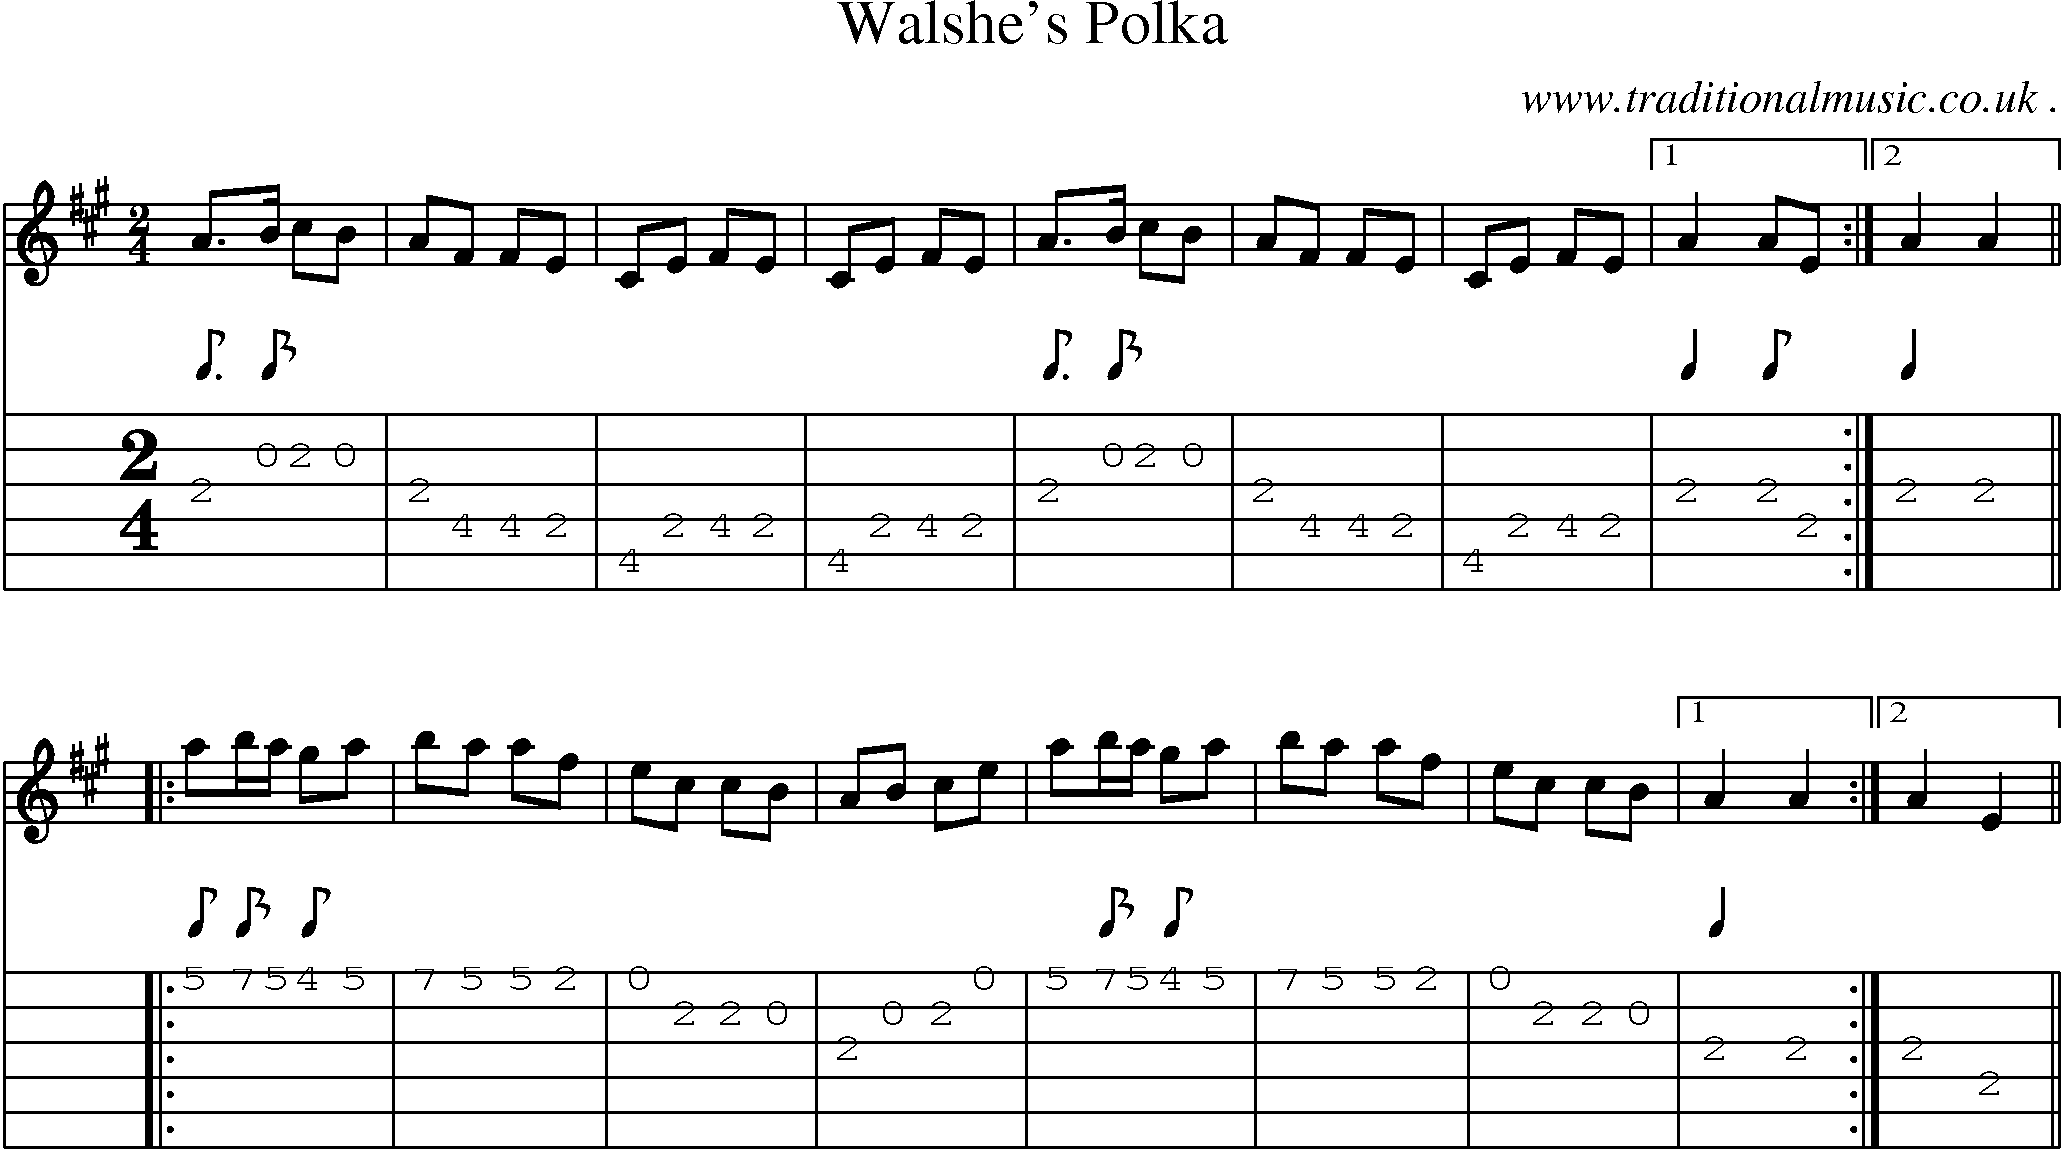 Sheet-Music and Guitar Tabs for Walshes Polka